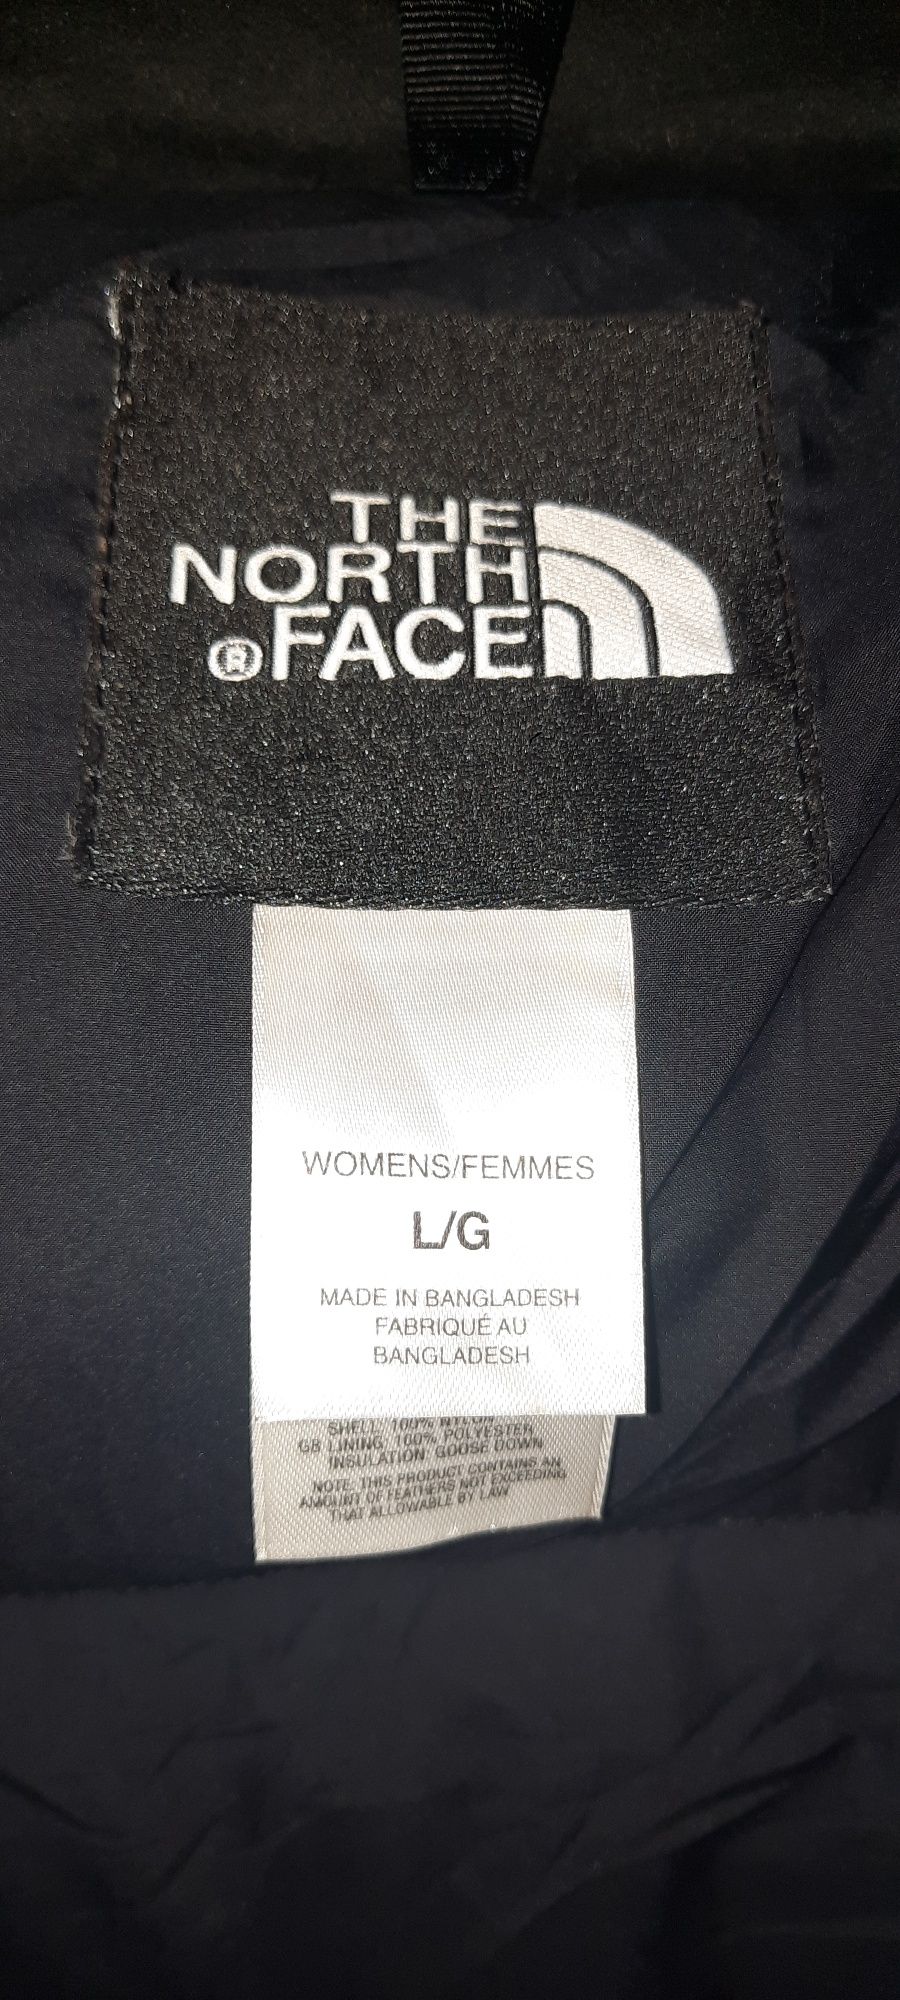 The North Face 700 елек с пух намален на 50 %